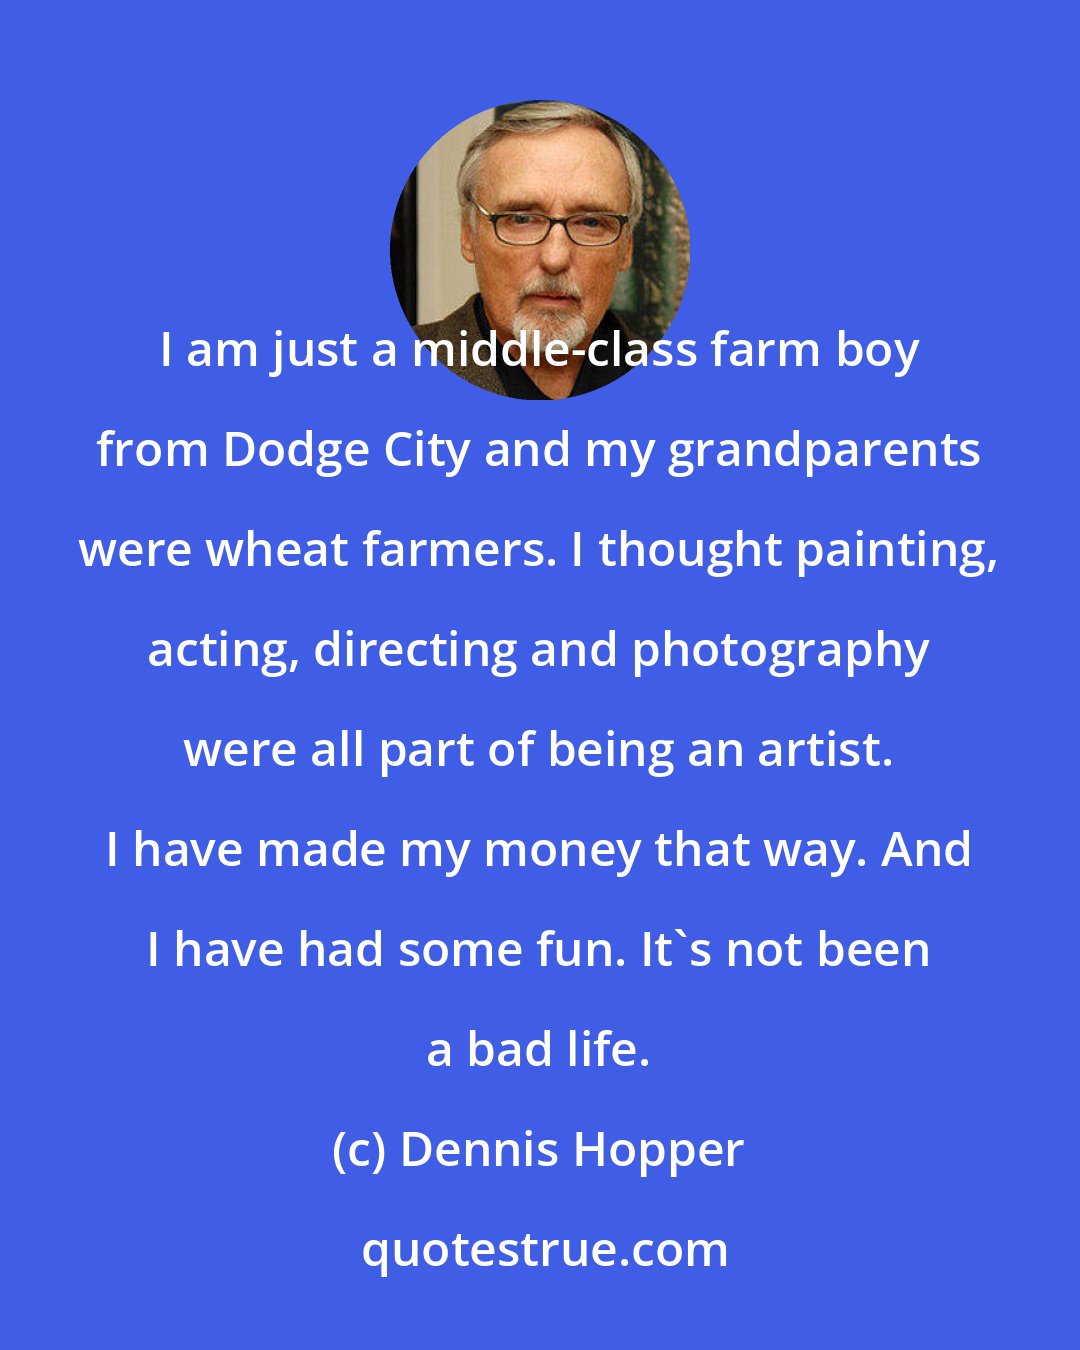 Dennis Hopper: I am just a middle-class farm boy from Dodge City and my grandparents were wheat farmers. I thought painting, acting, directing and photography were all part of being an artist. I have made my money that way. And I have had some fun. It's not been a bad life.